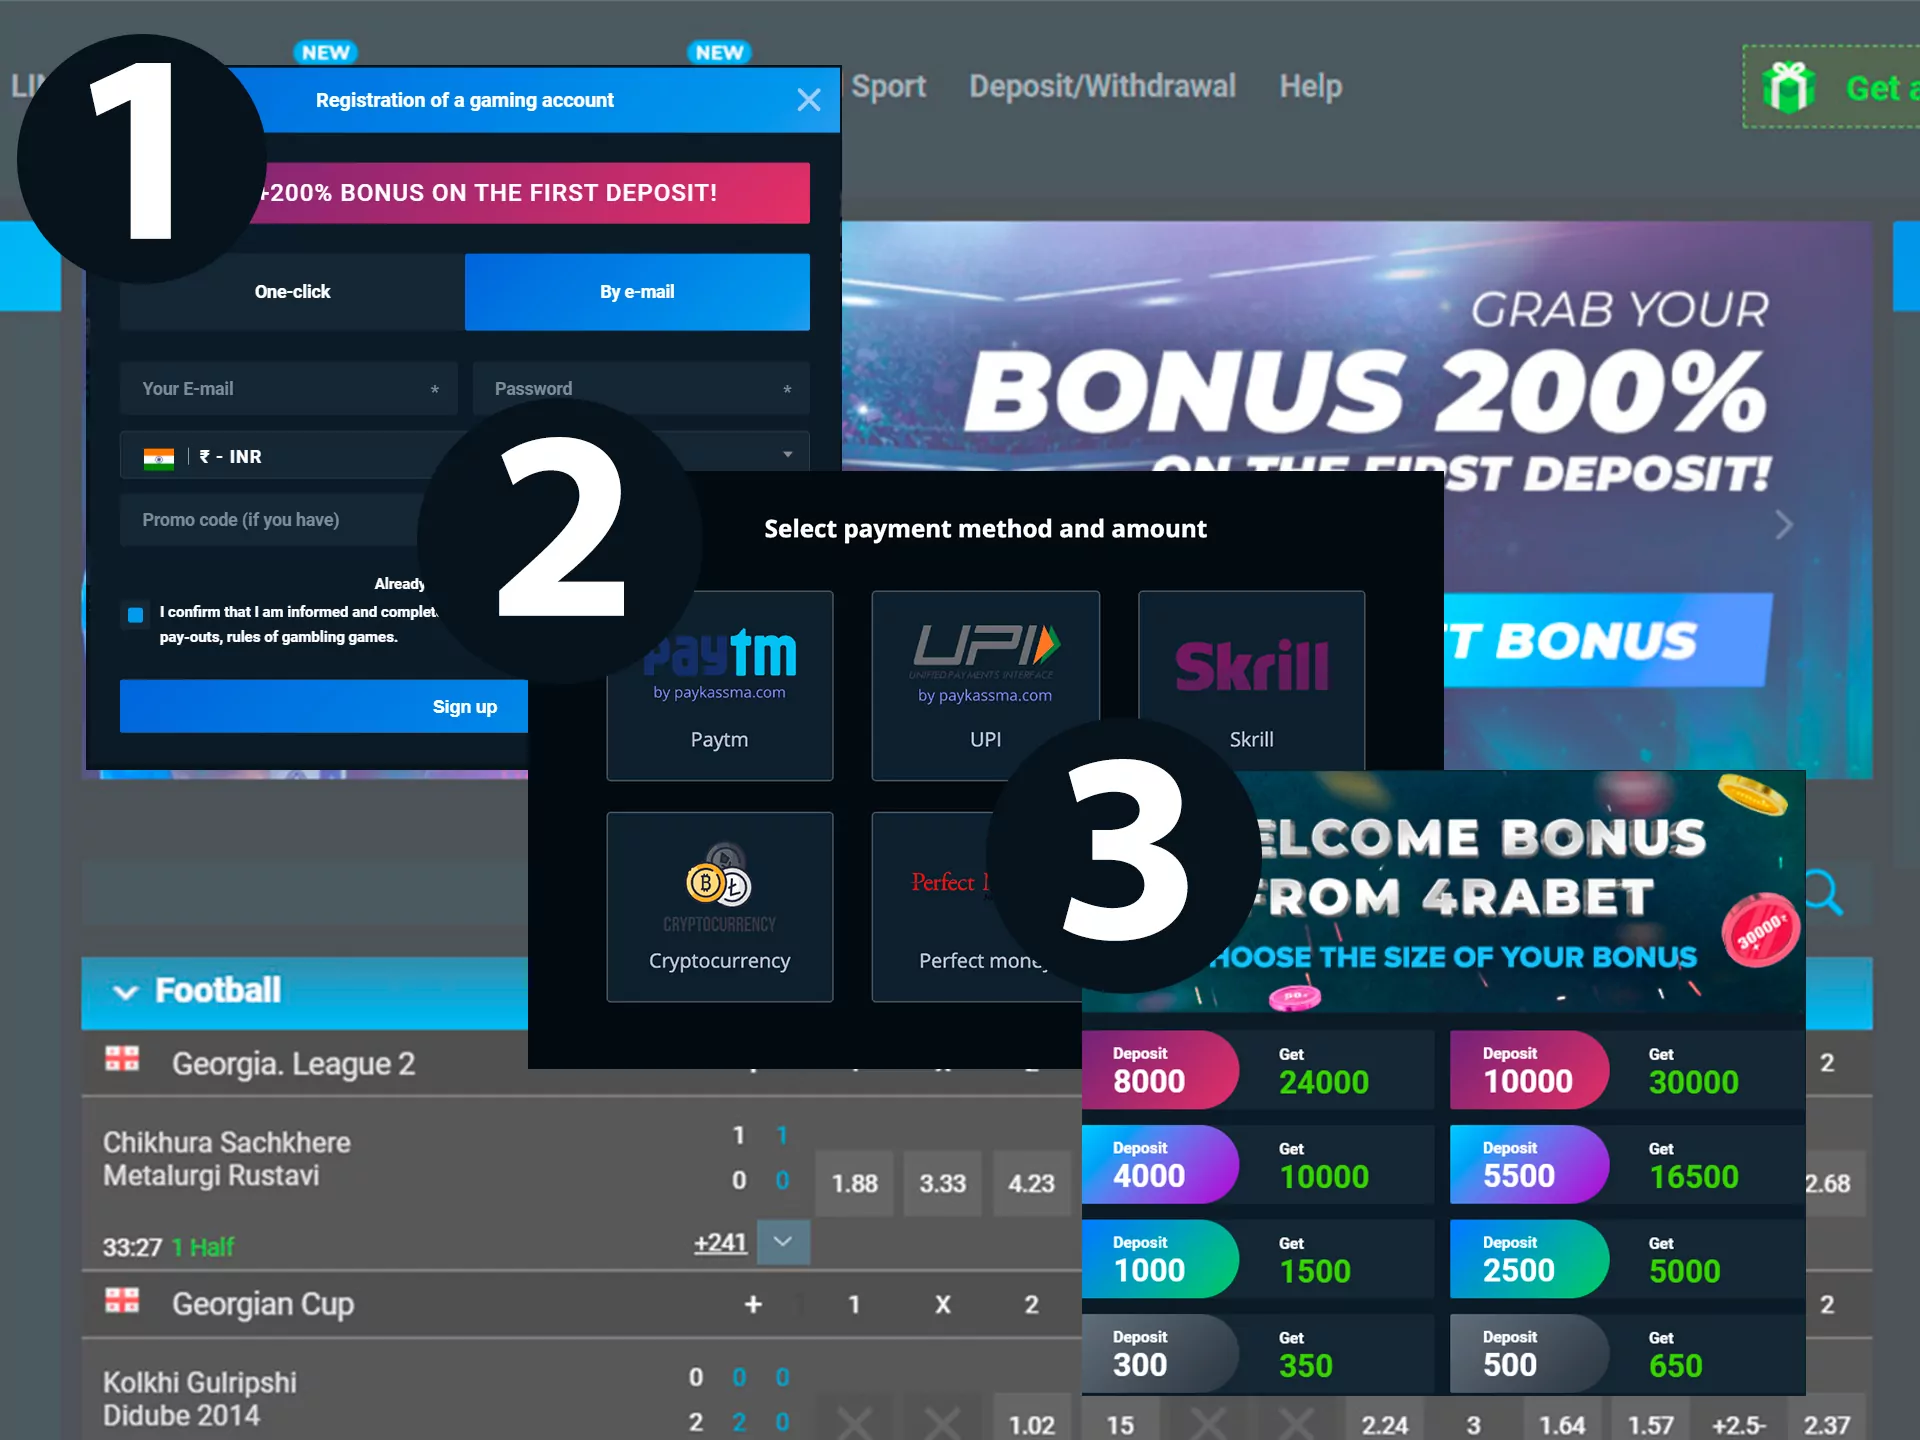 Make an account at 4rabet, top up it and get the bonus to start betting.